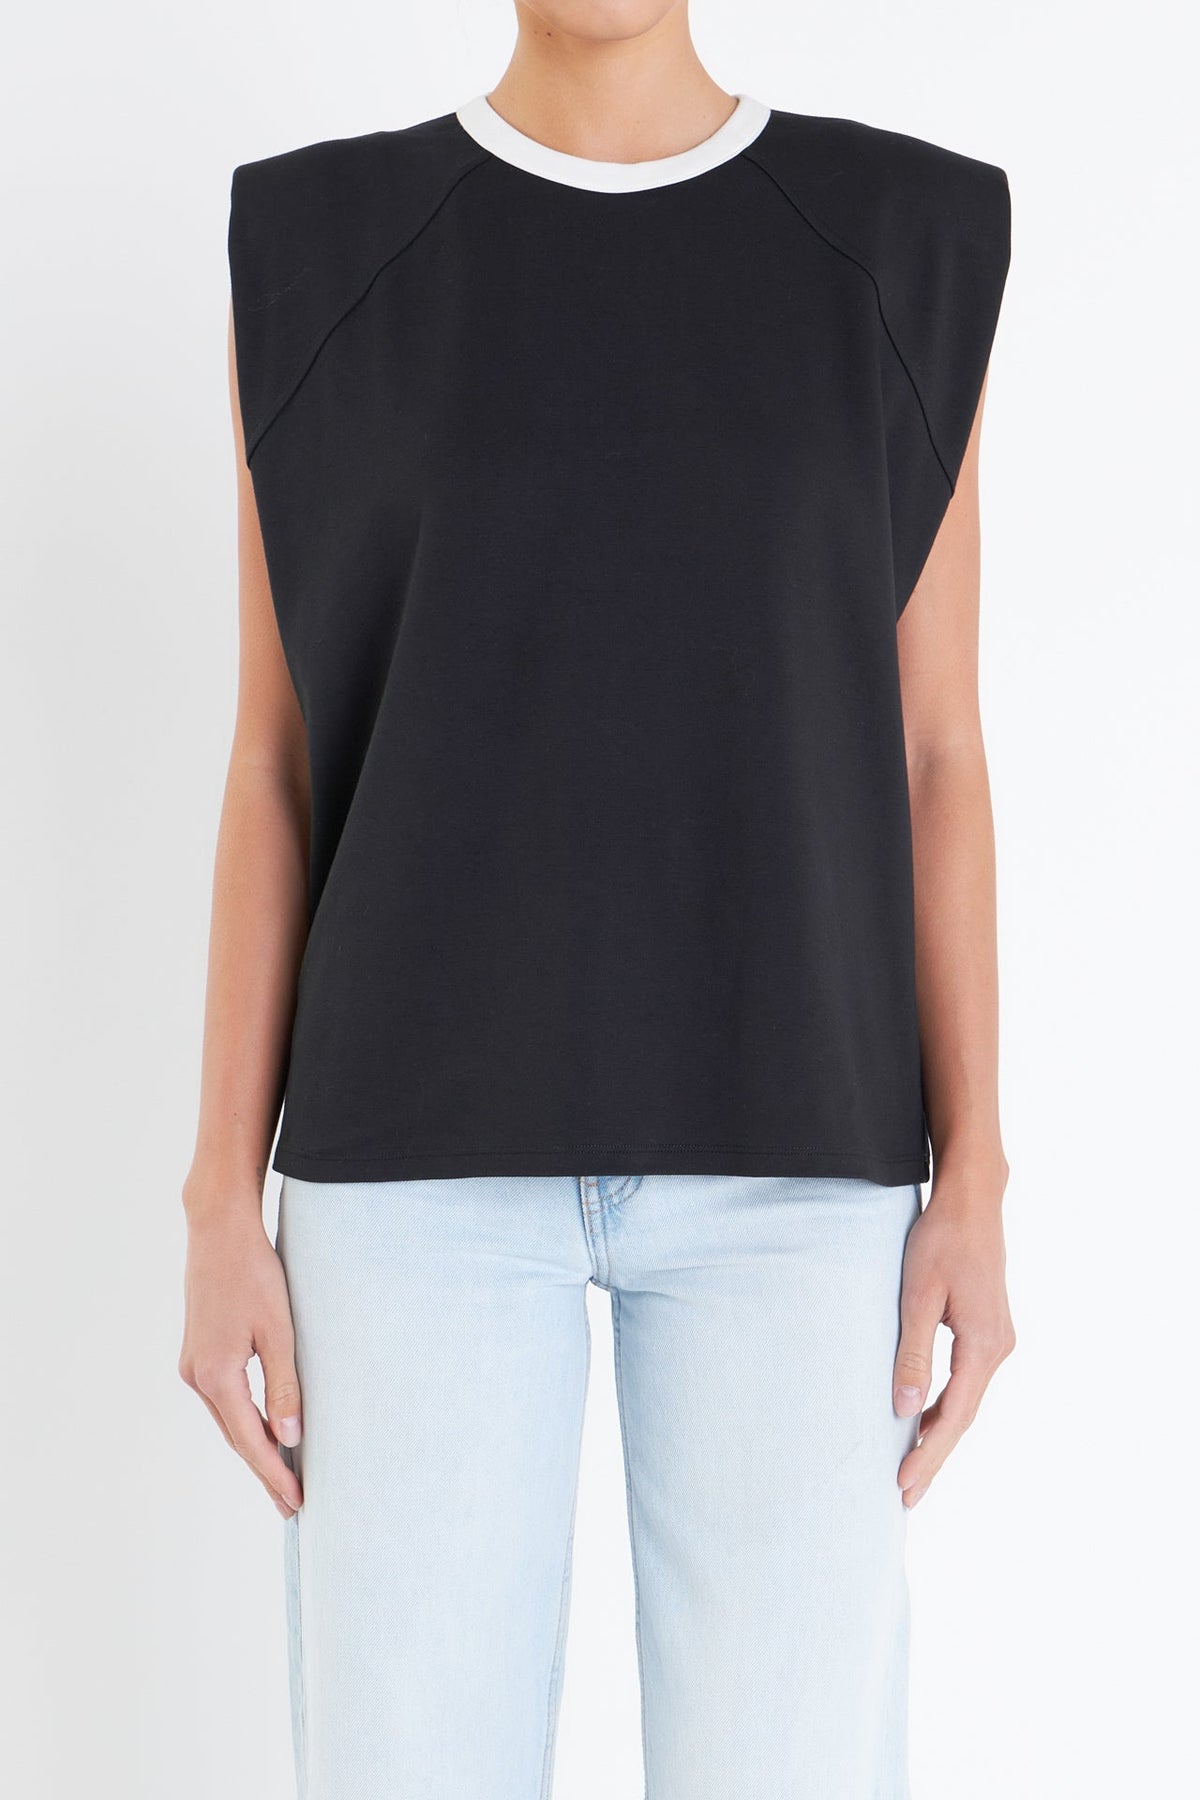 GREY LAB - Contrast Neckline Sleeveless Top - T-SHIRTS available at Objectrare